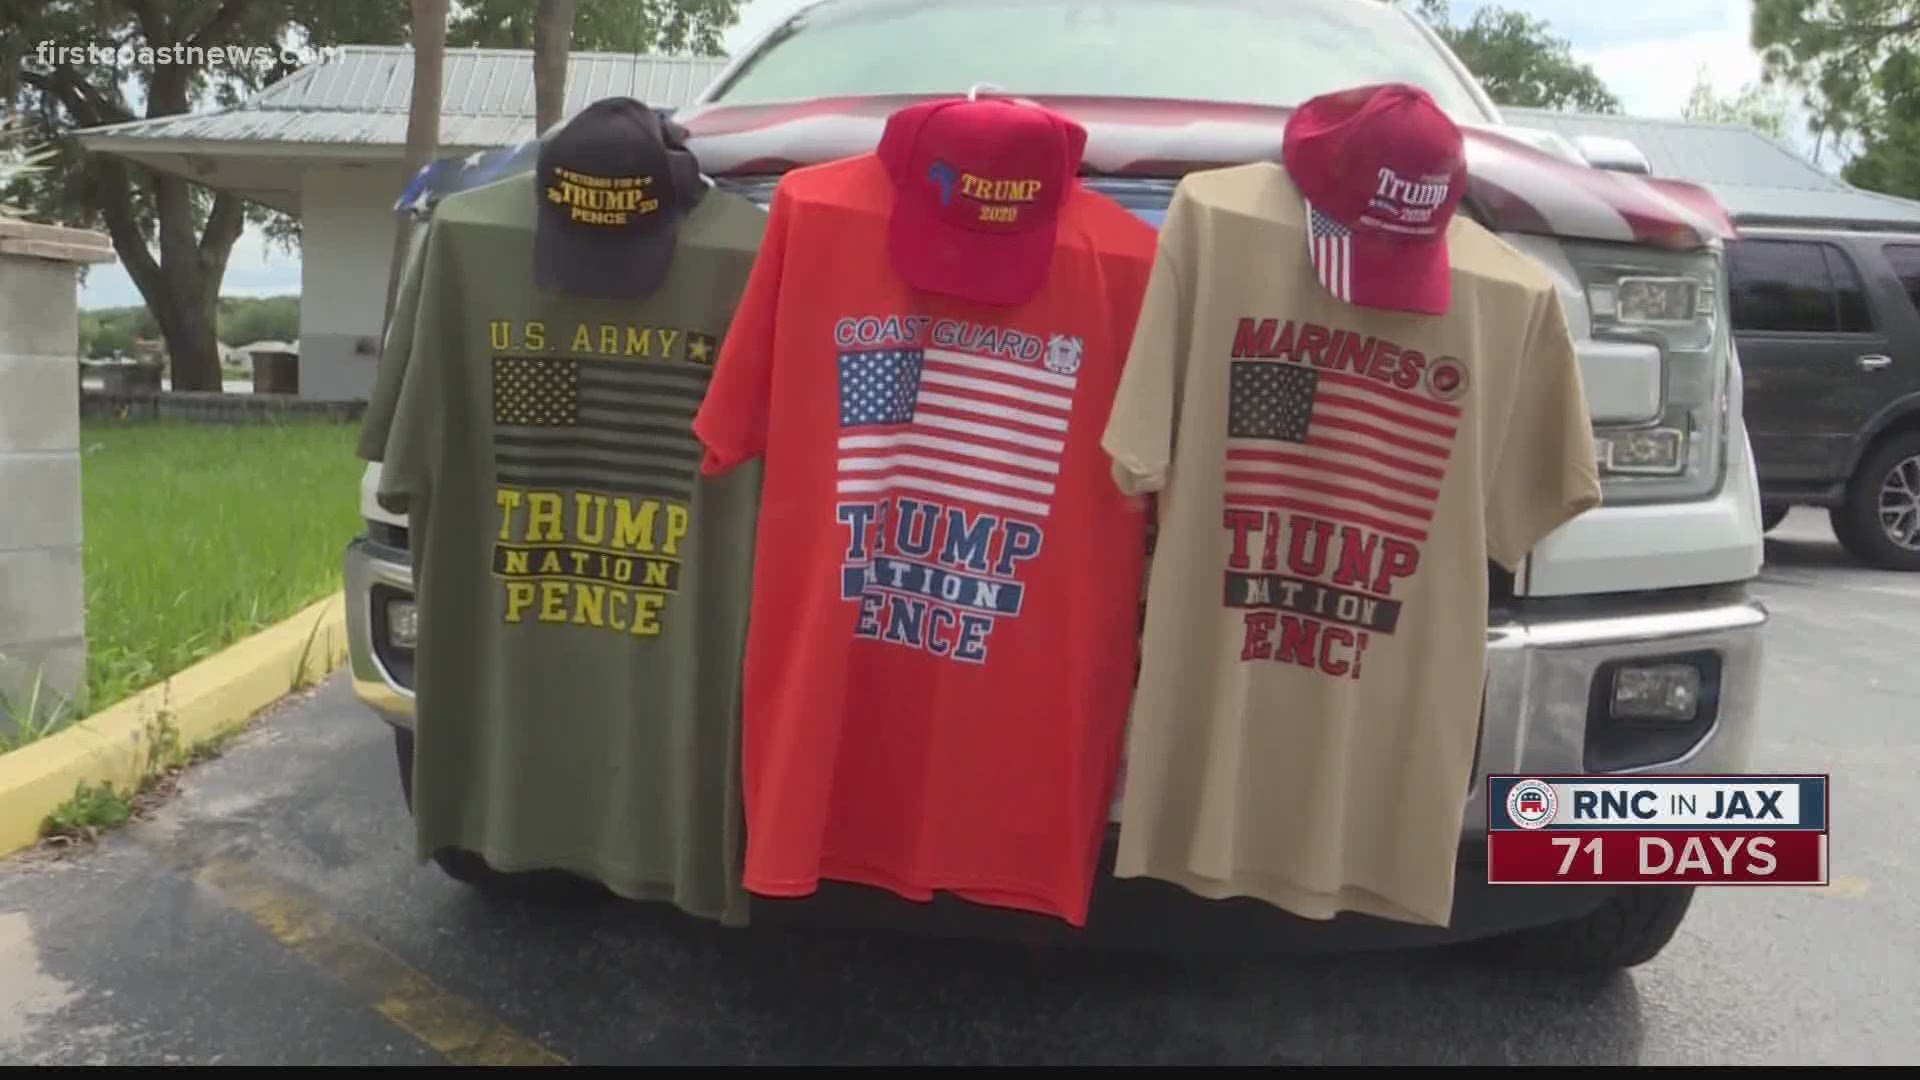 Days after the Republican National Committee announced it's moving convention to Jacksonville, Trump merchandisers are doing brisk business on First Coast.